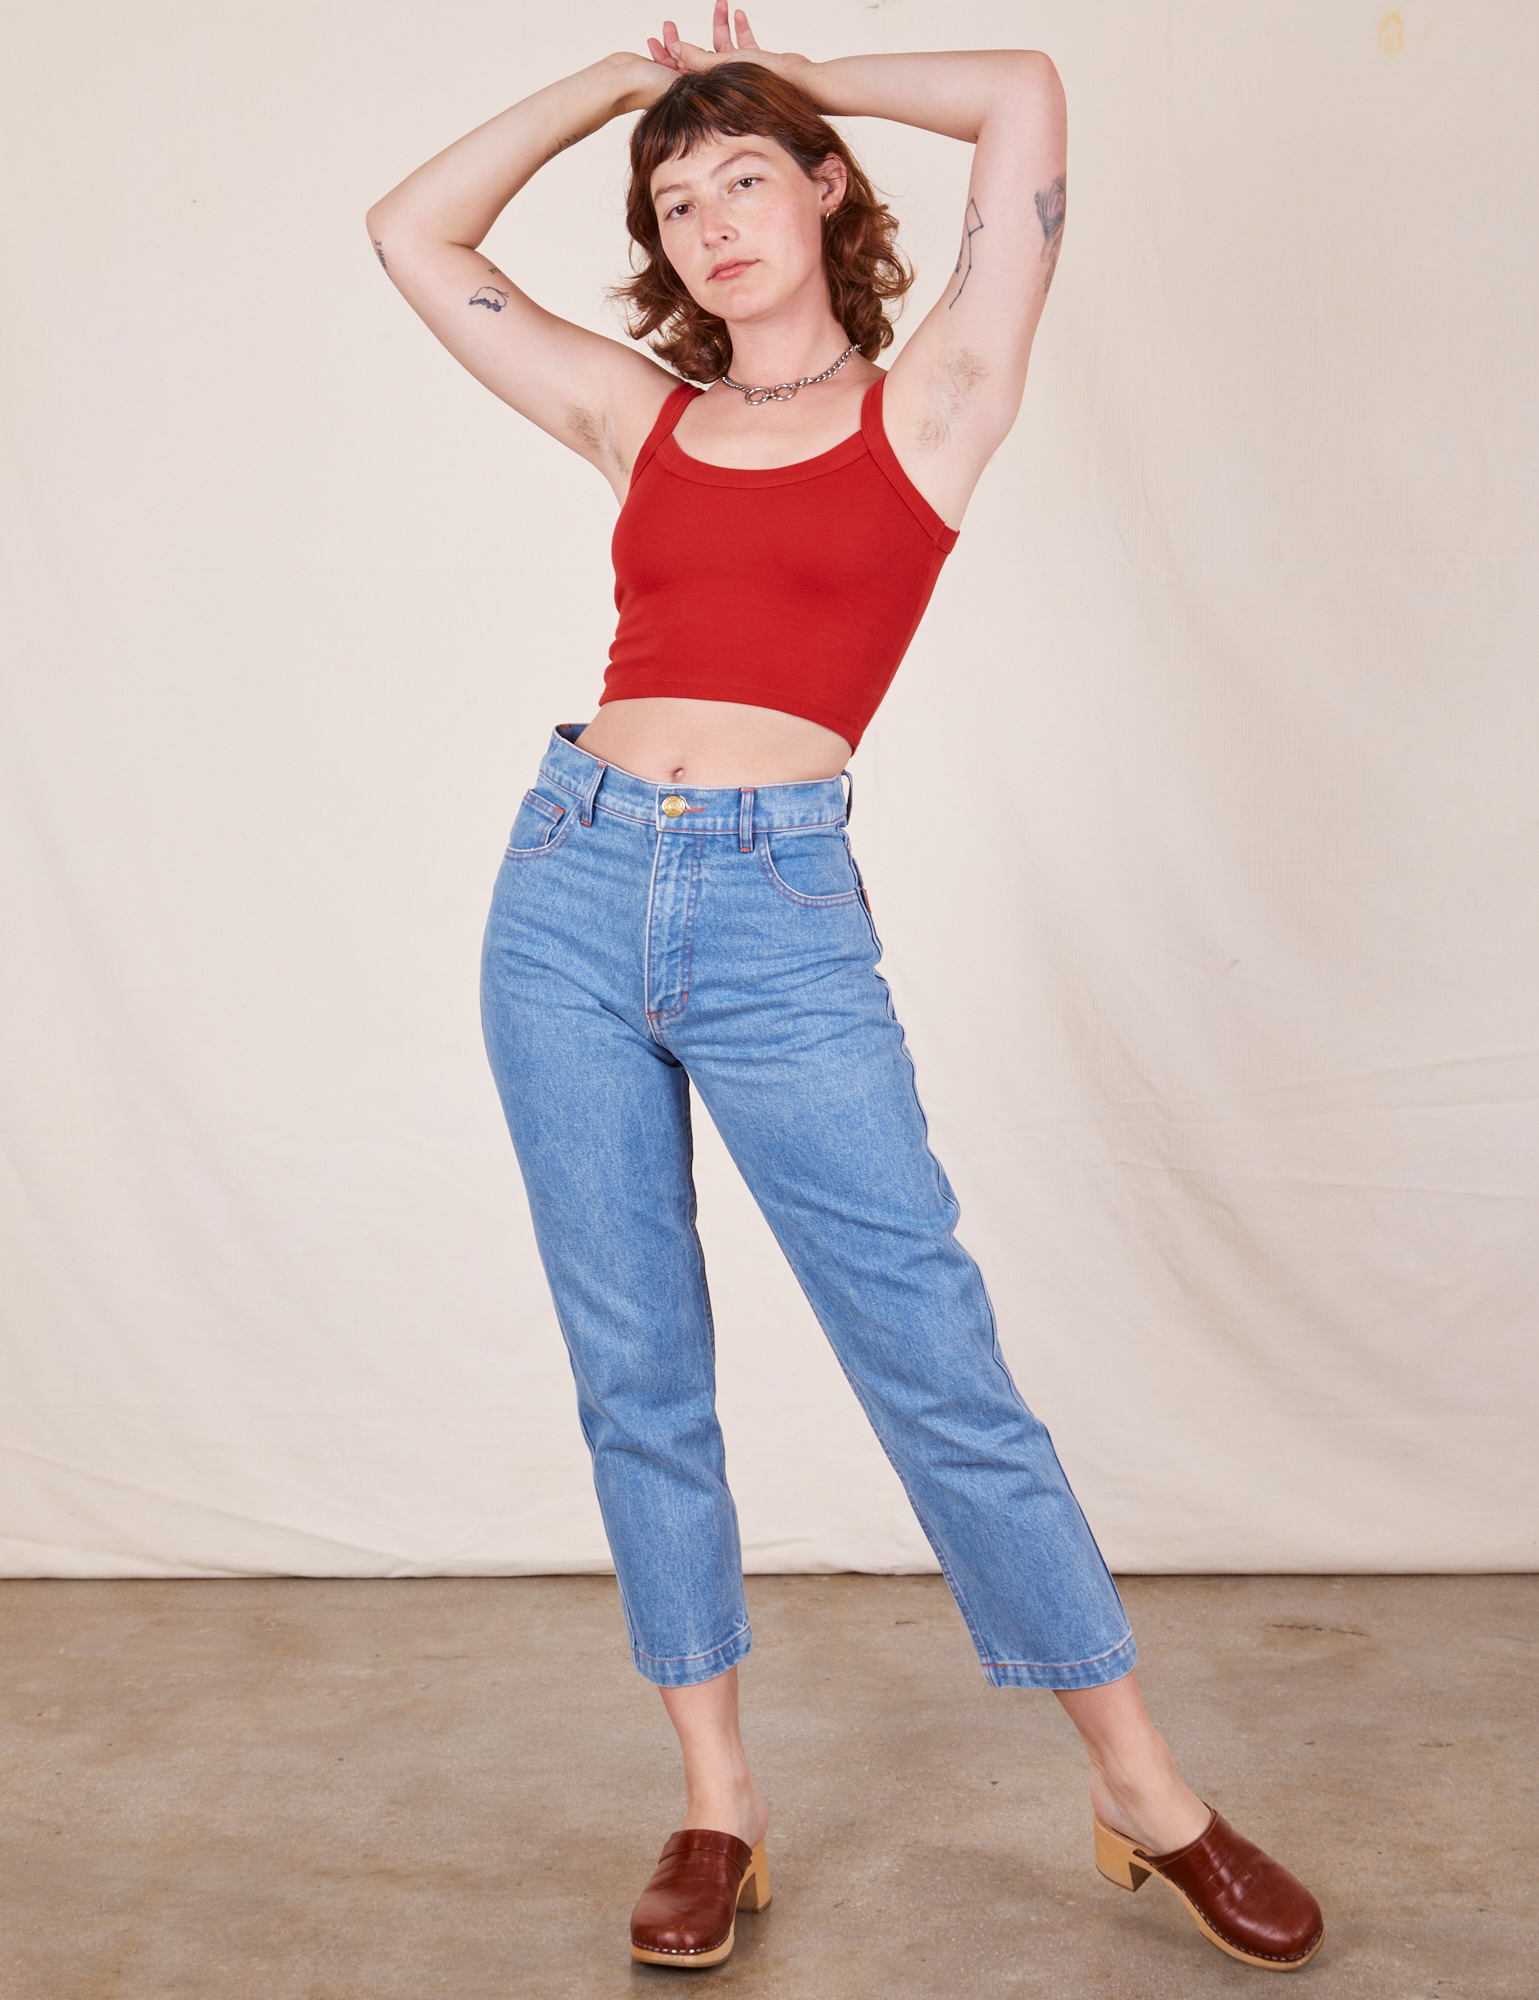 Alex is 5&#39;8&quot; and wearing P Cropped Cami in Mustang Red paired with light wash Frontier Jeans